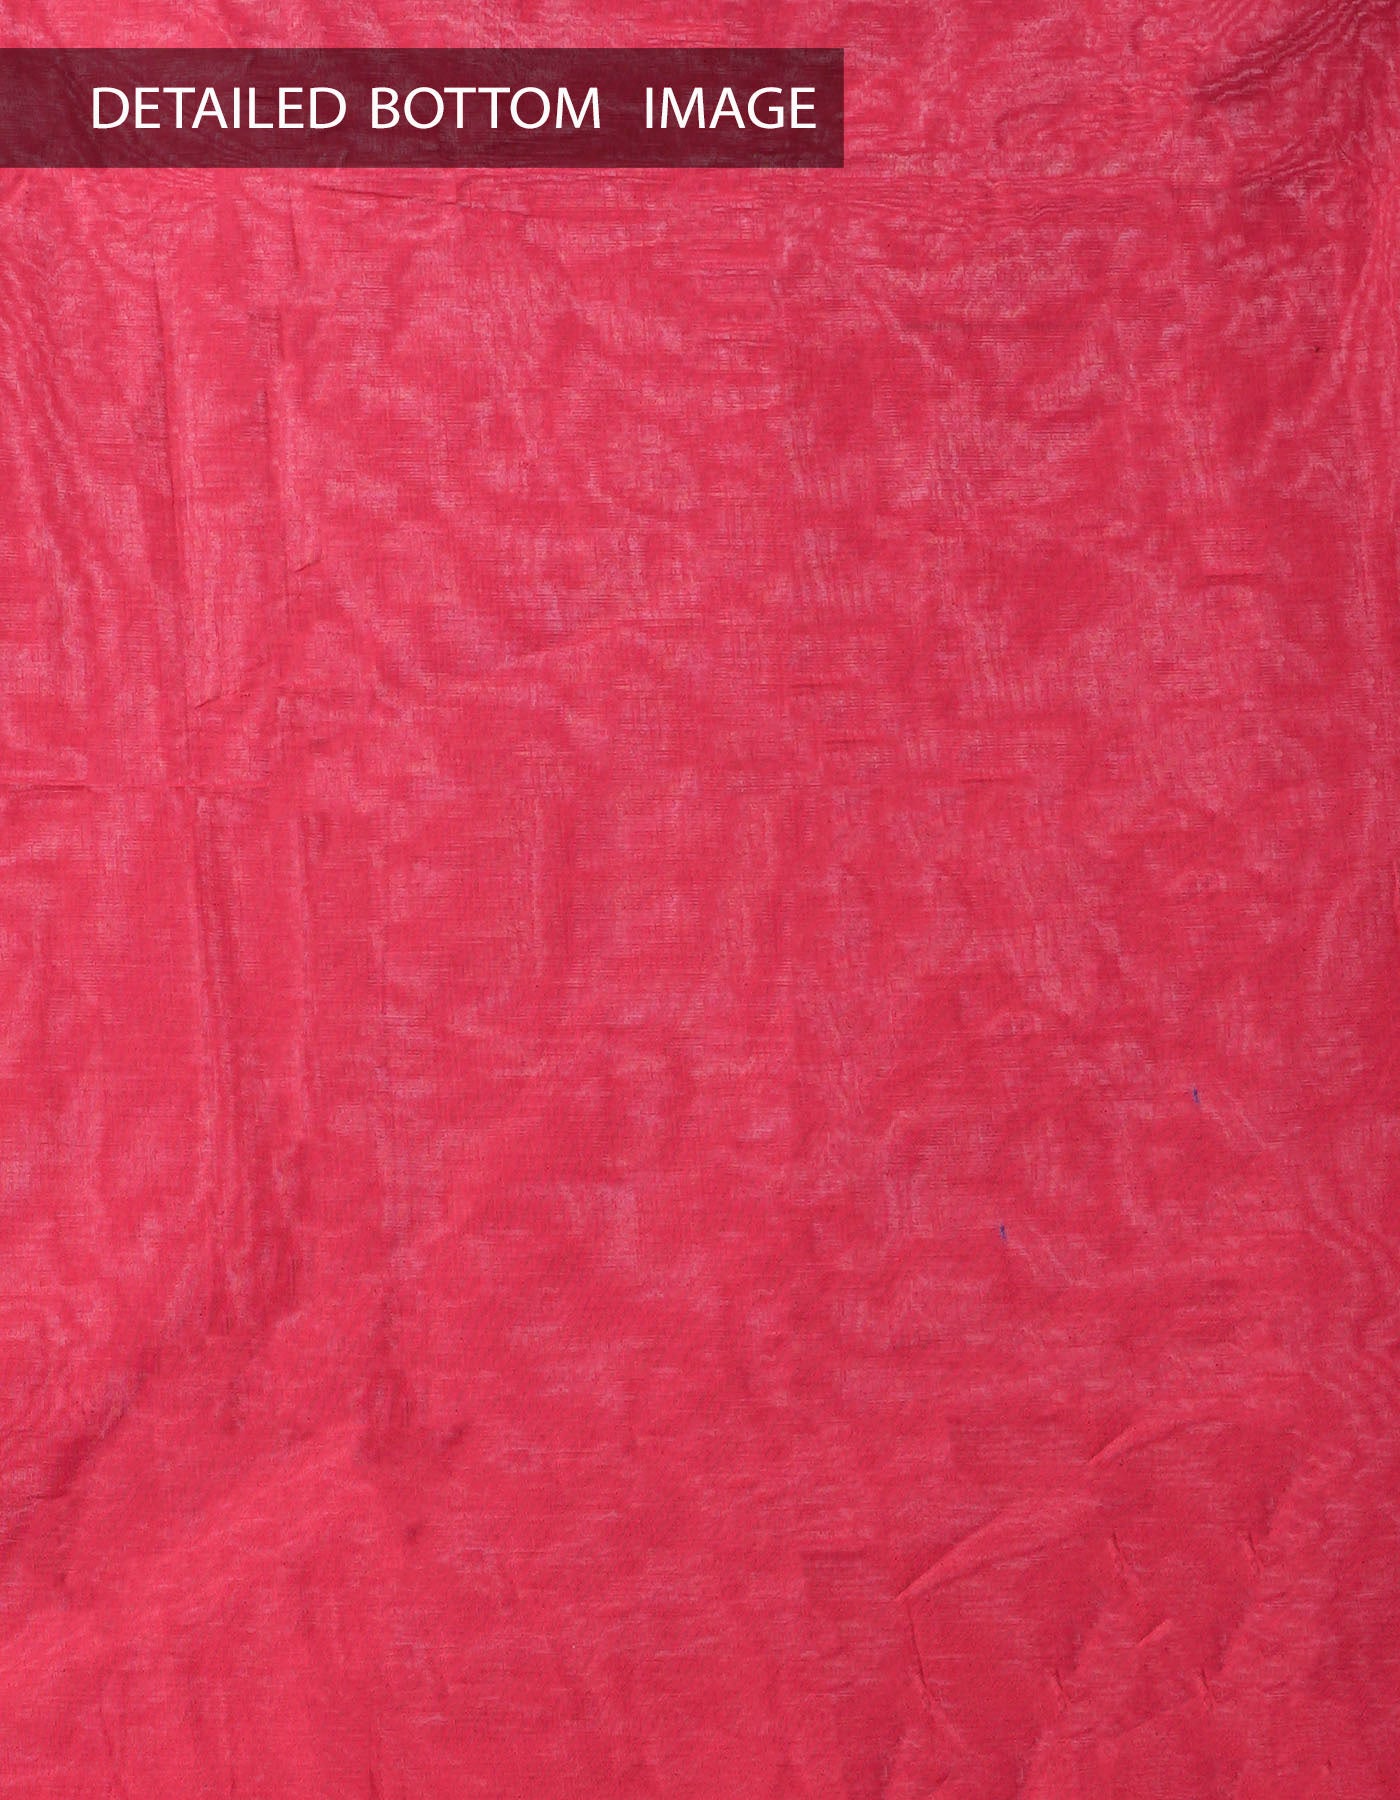 Online Shopping for Unstitched Multi-Red Pure Mangalagiri Cotton Salwar Kameez with weaves from  at Unnatisilks.com, India 